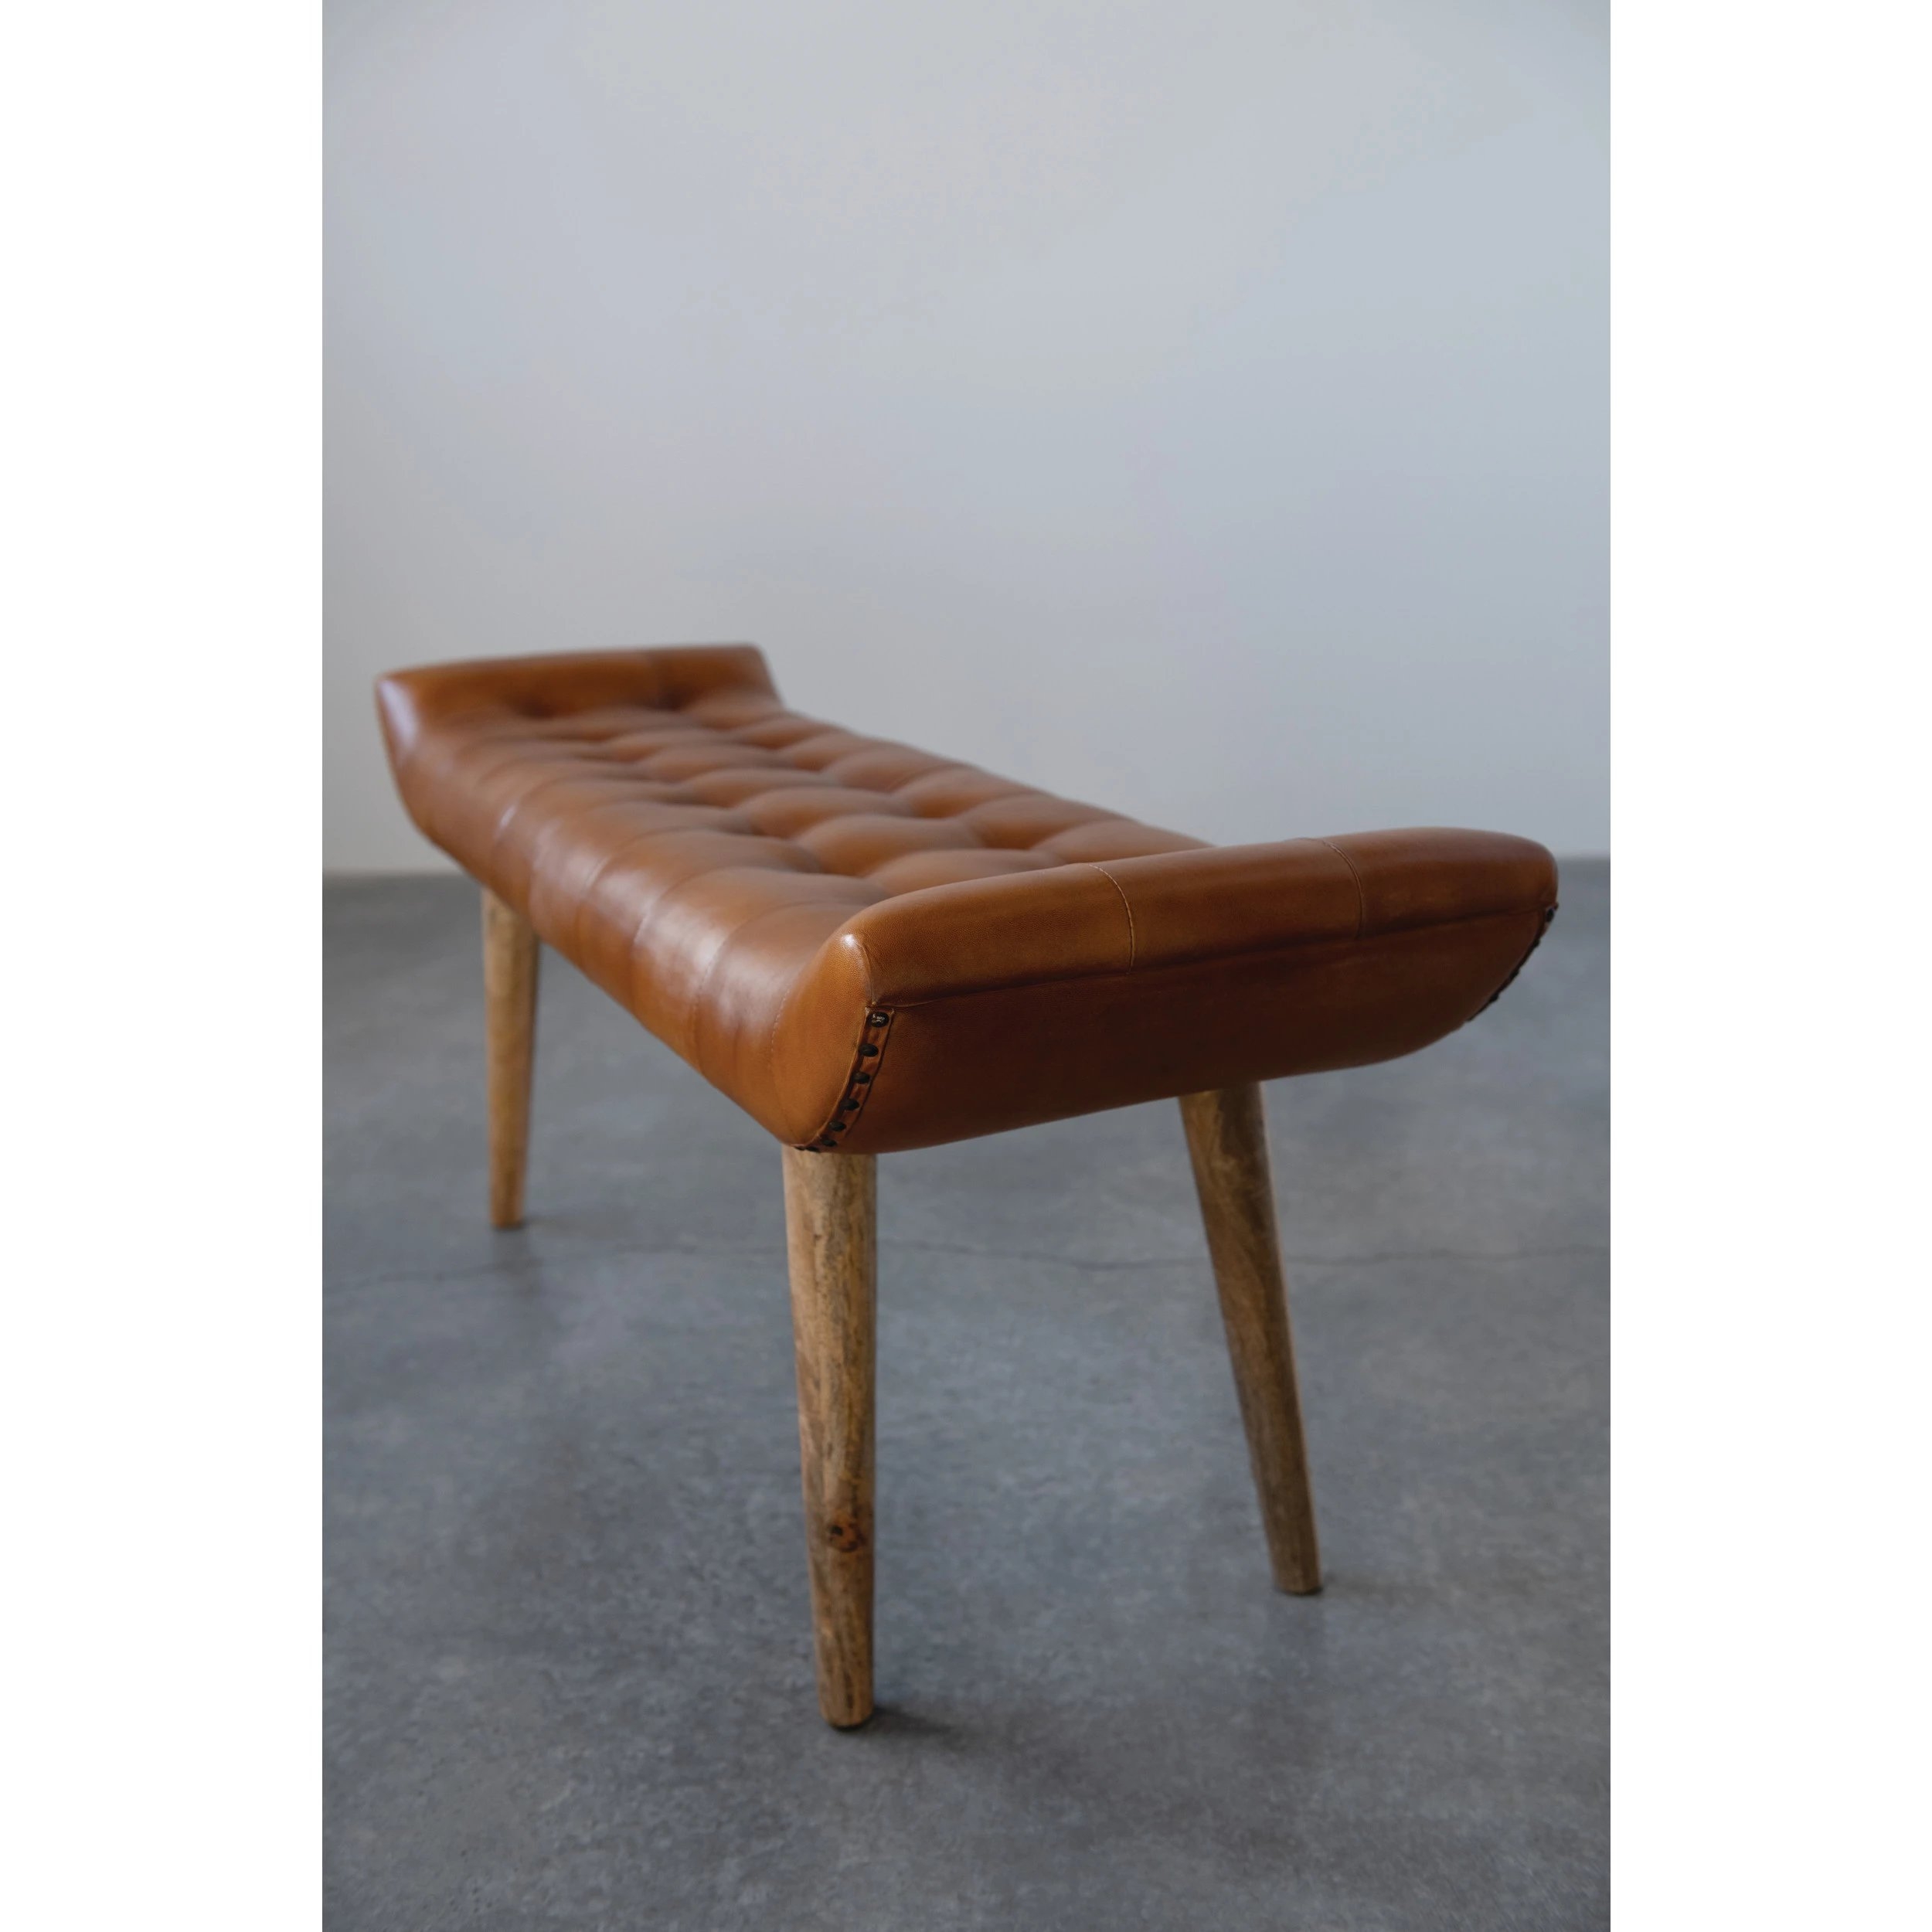 Leather Tufted Bench with Mango Wood Legs - Image 2